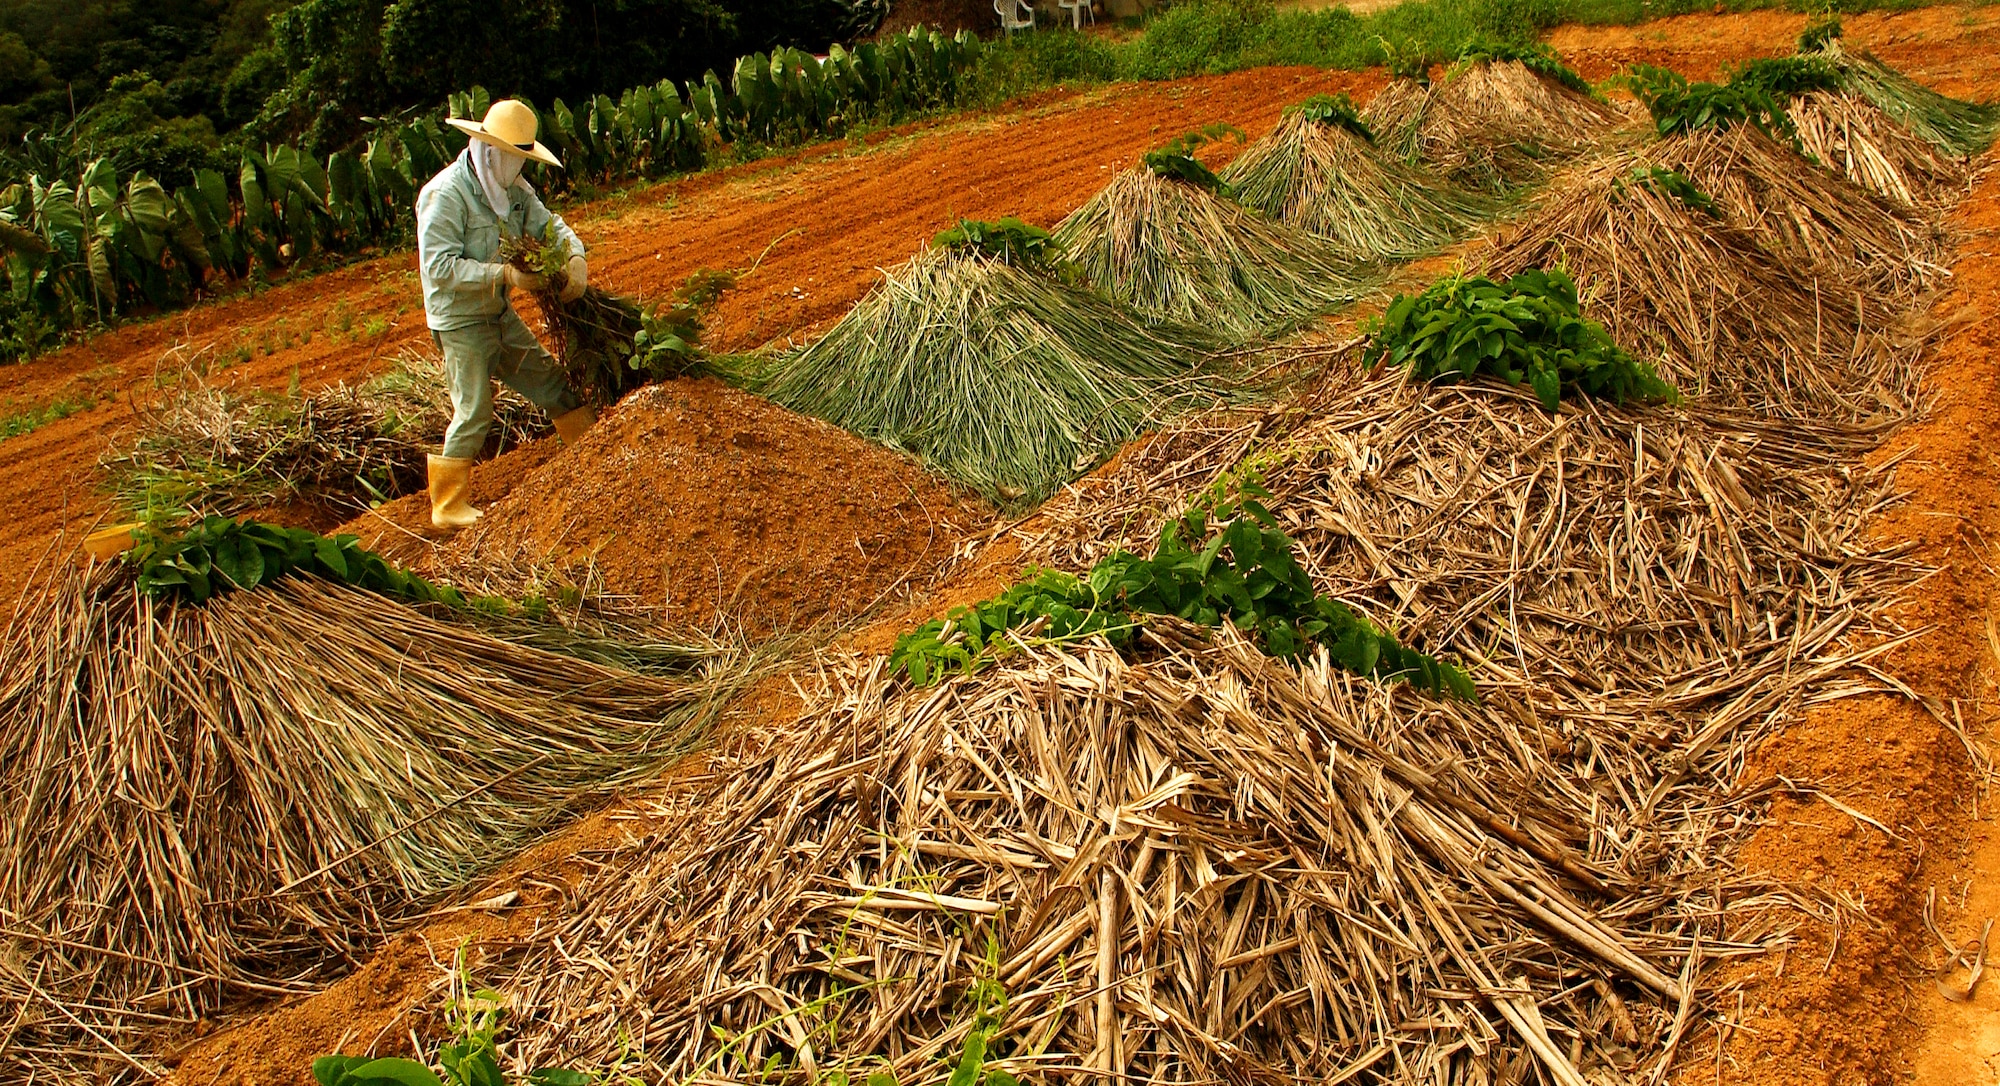 A tacit farmer piles dead leaves on mounds storing planted yams to keep them moist until harvest time at Kadena Air Base, Japan. Nearly 90 acres of land located in the munitions storage area is used by the tacit farmers to grow crops surrounded by hills and a capturing view of a well-preserved past. (U.S. Air Force photo/Tech. Sgt. Rey Ramon)                                                       